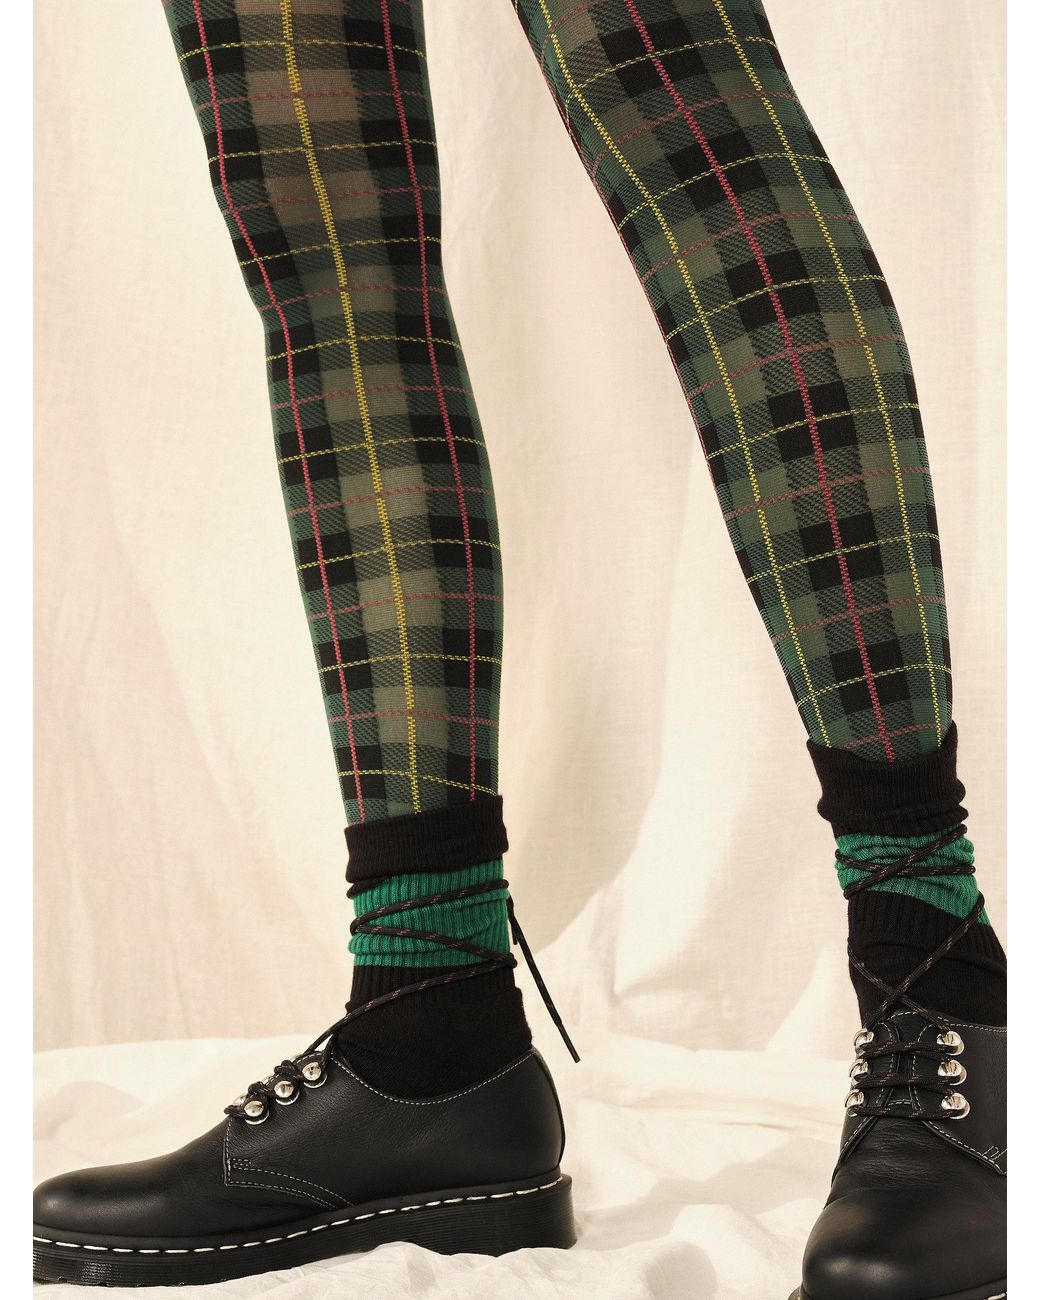 Free People London Plaid Tights in Green